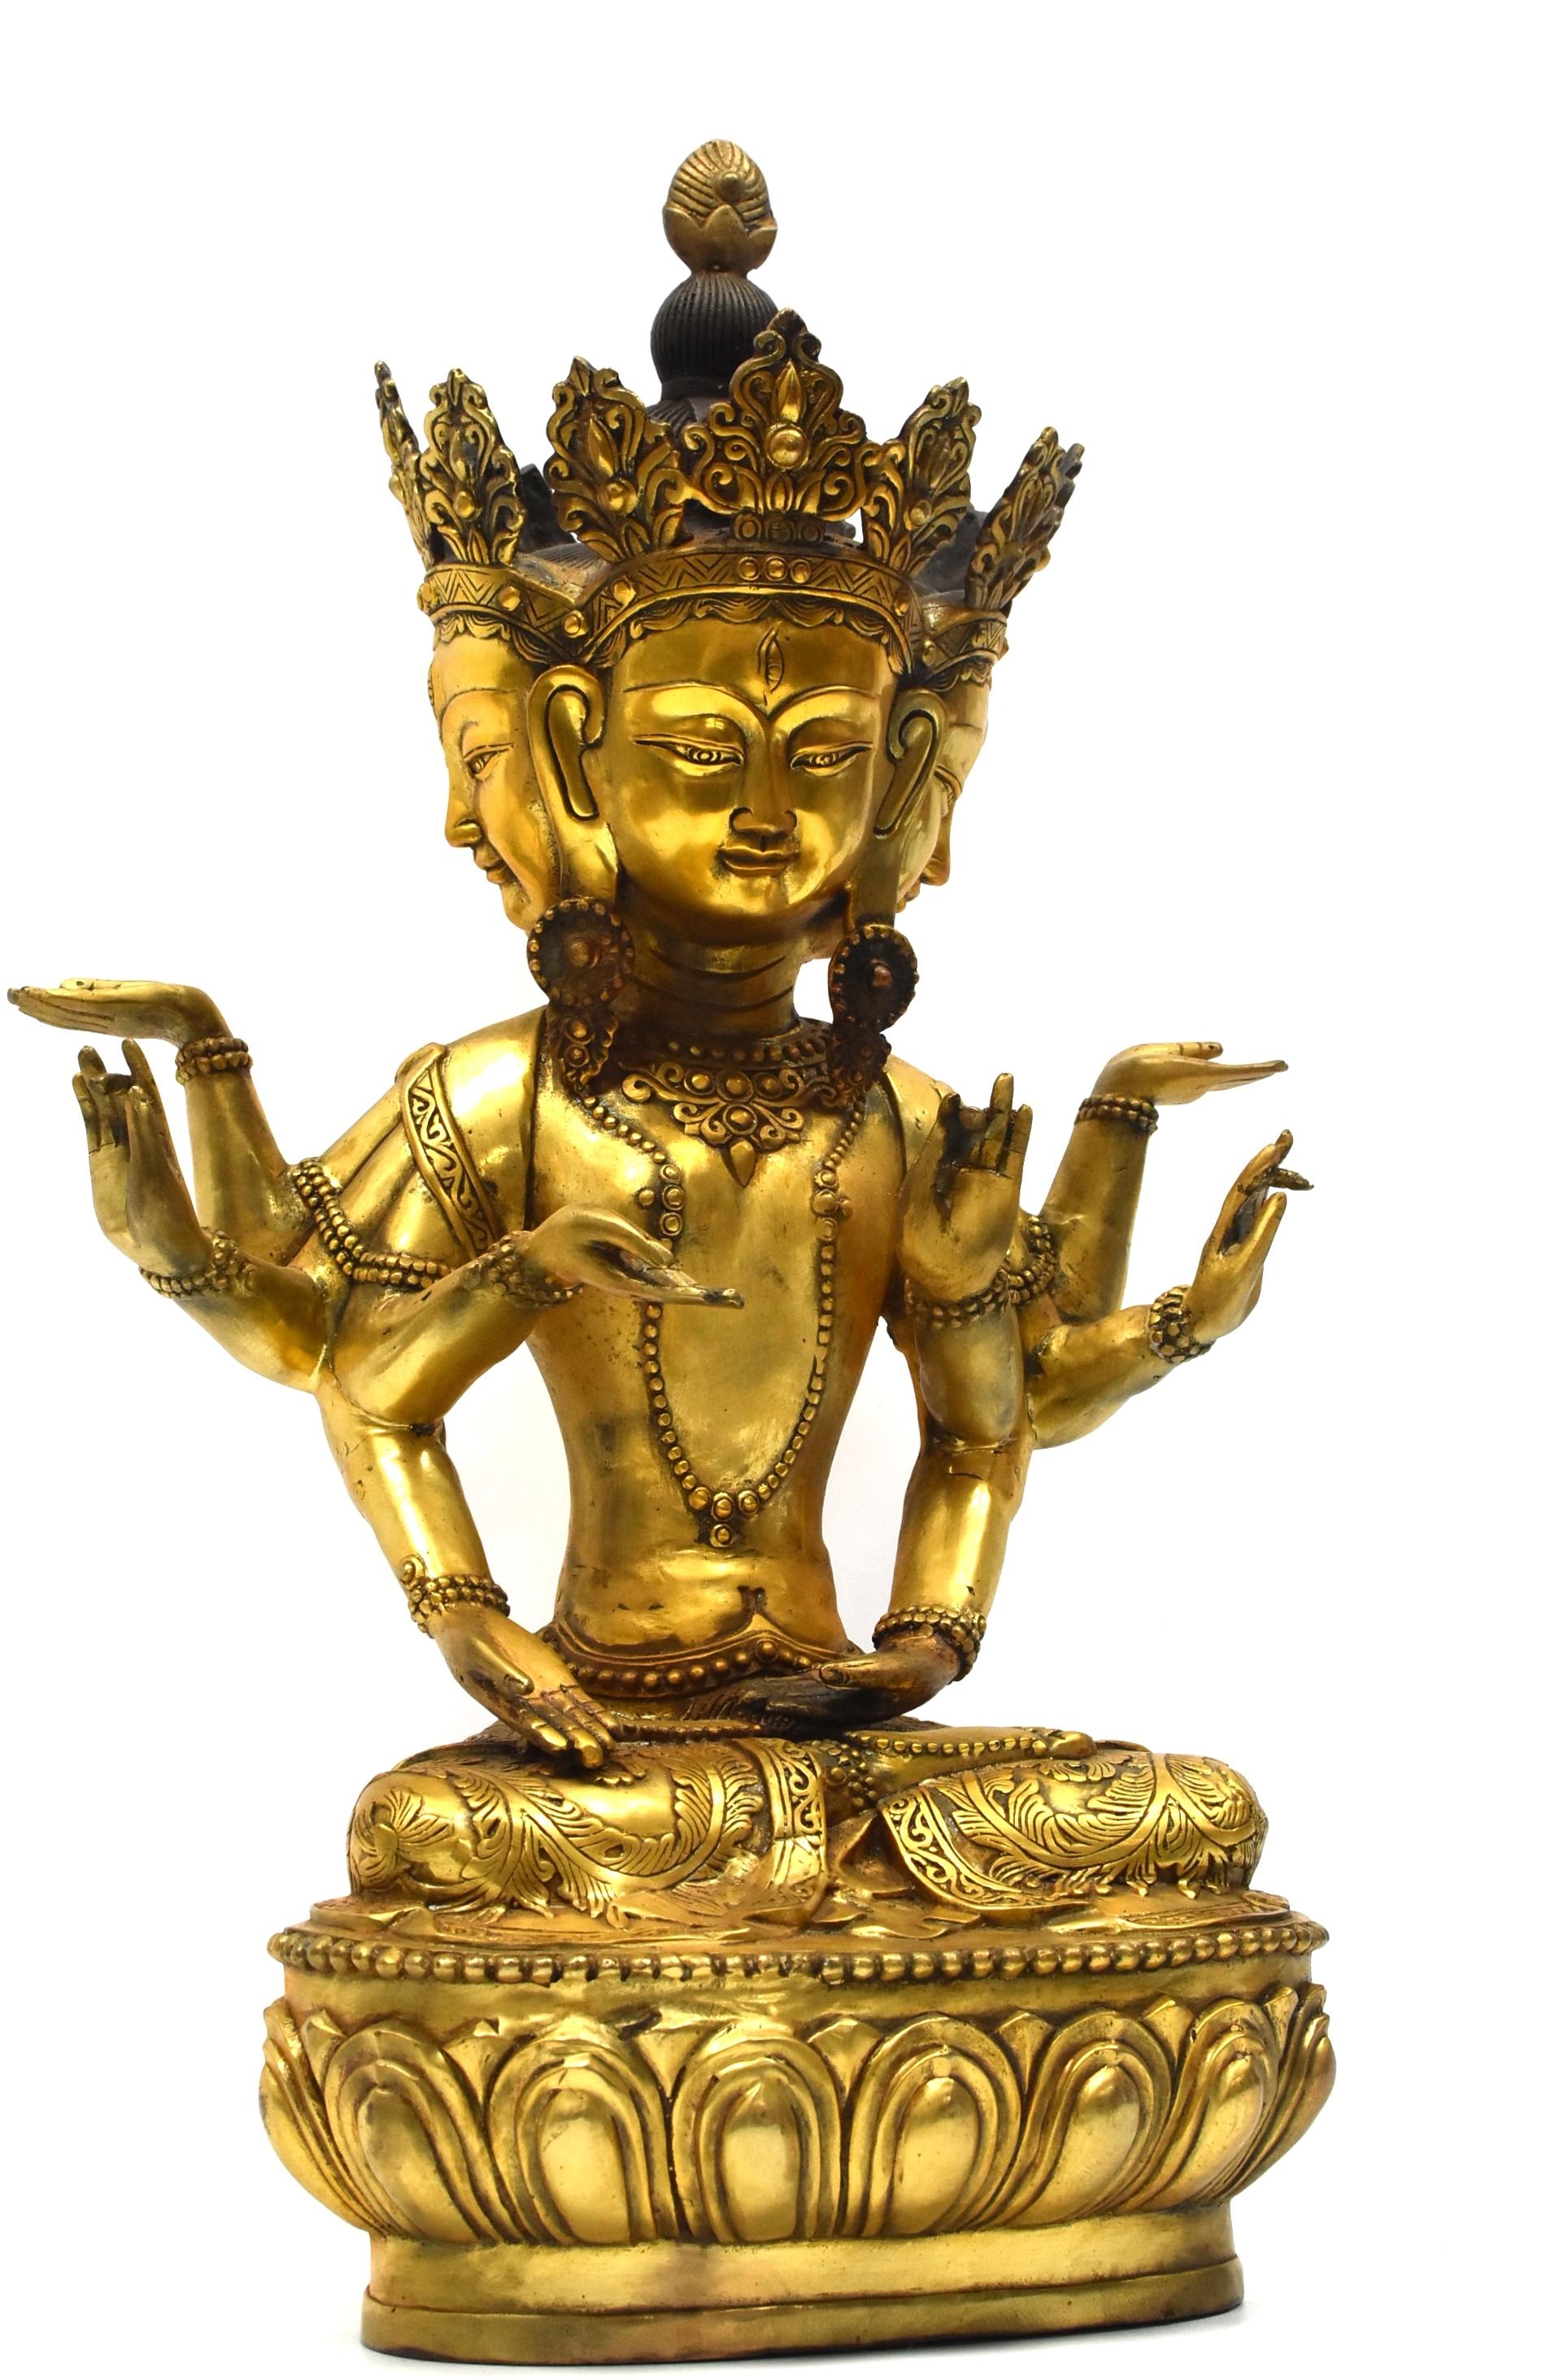 A spectacular piece featuring the Tibetan Bodhisattva Vasundhara, Goddess of wealth and abundance. Seated on double lotus, the multi-faced and multi-armed Buddha is powerful as she is able to assist in many areas at once. Superb craftsmanship